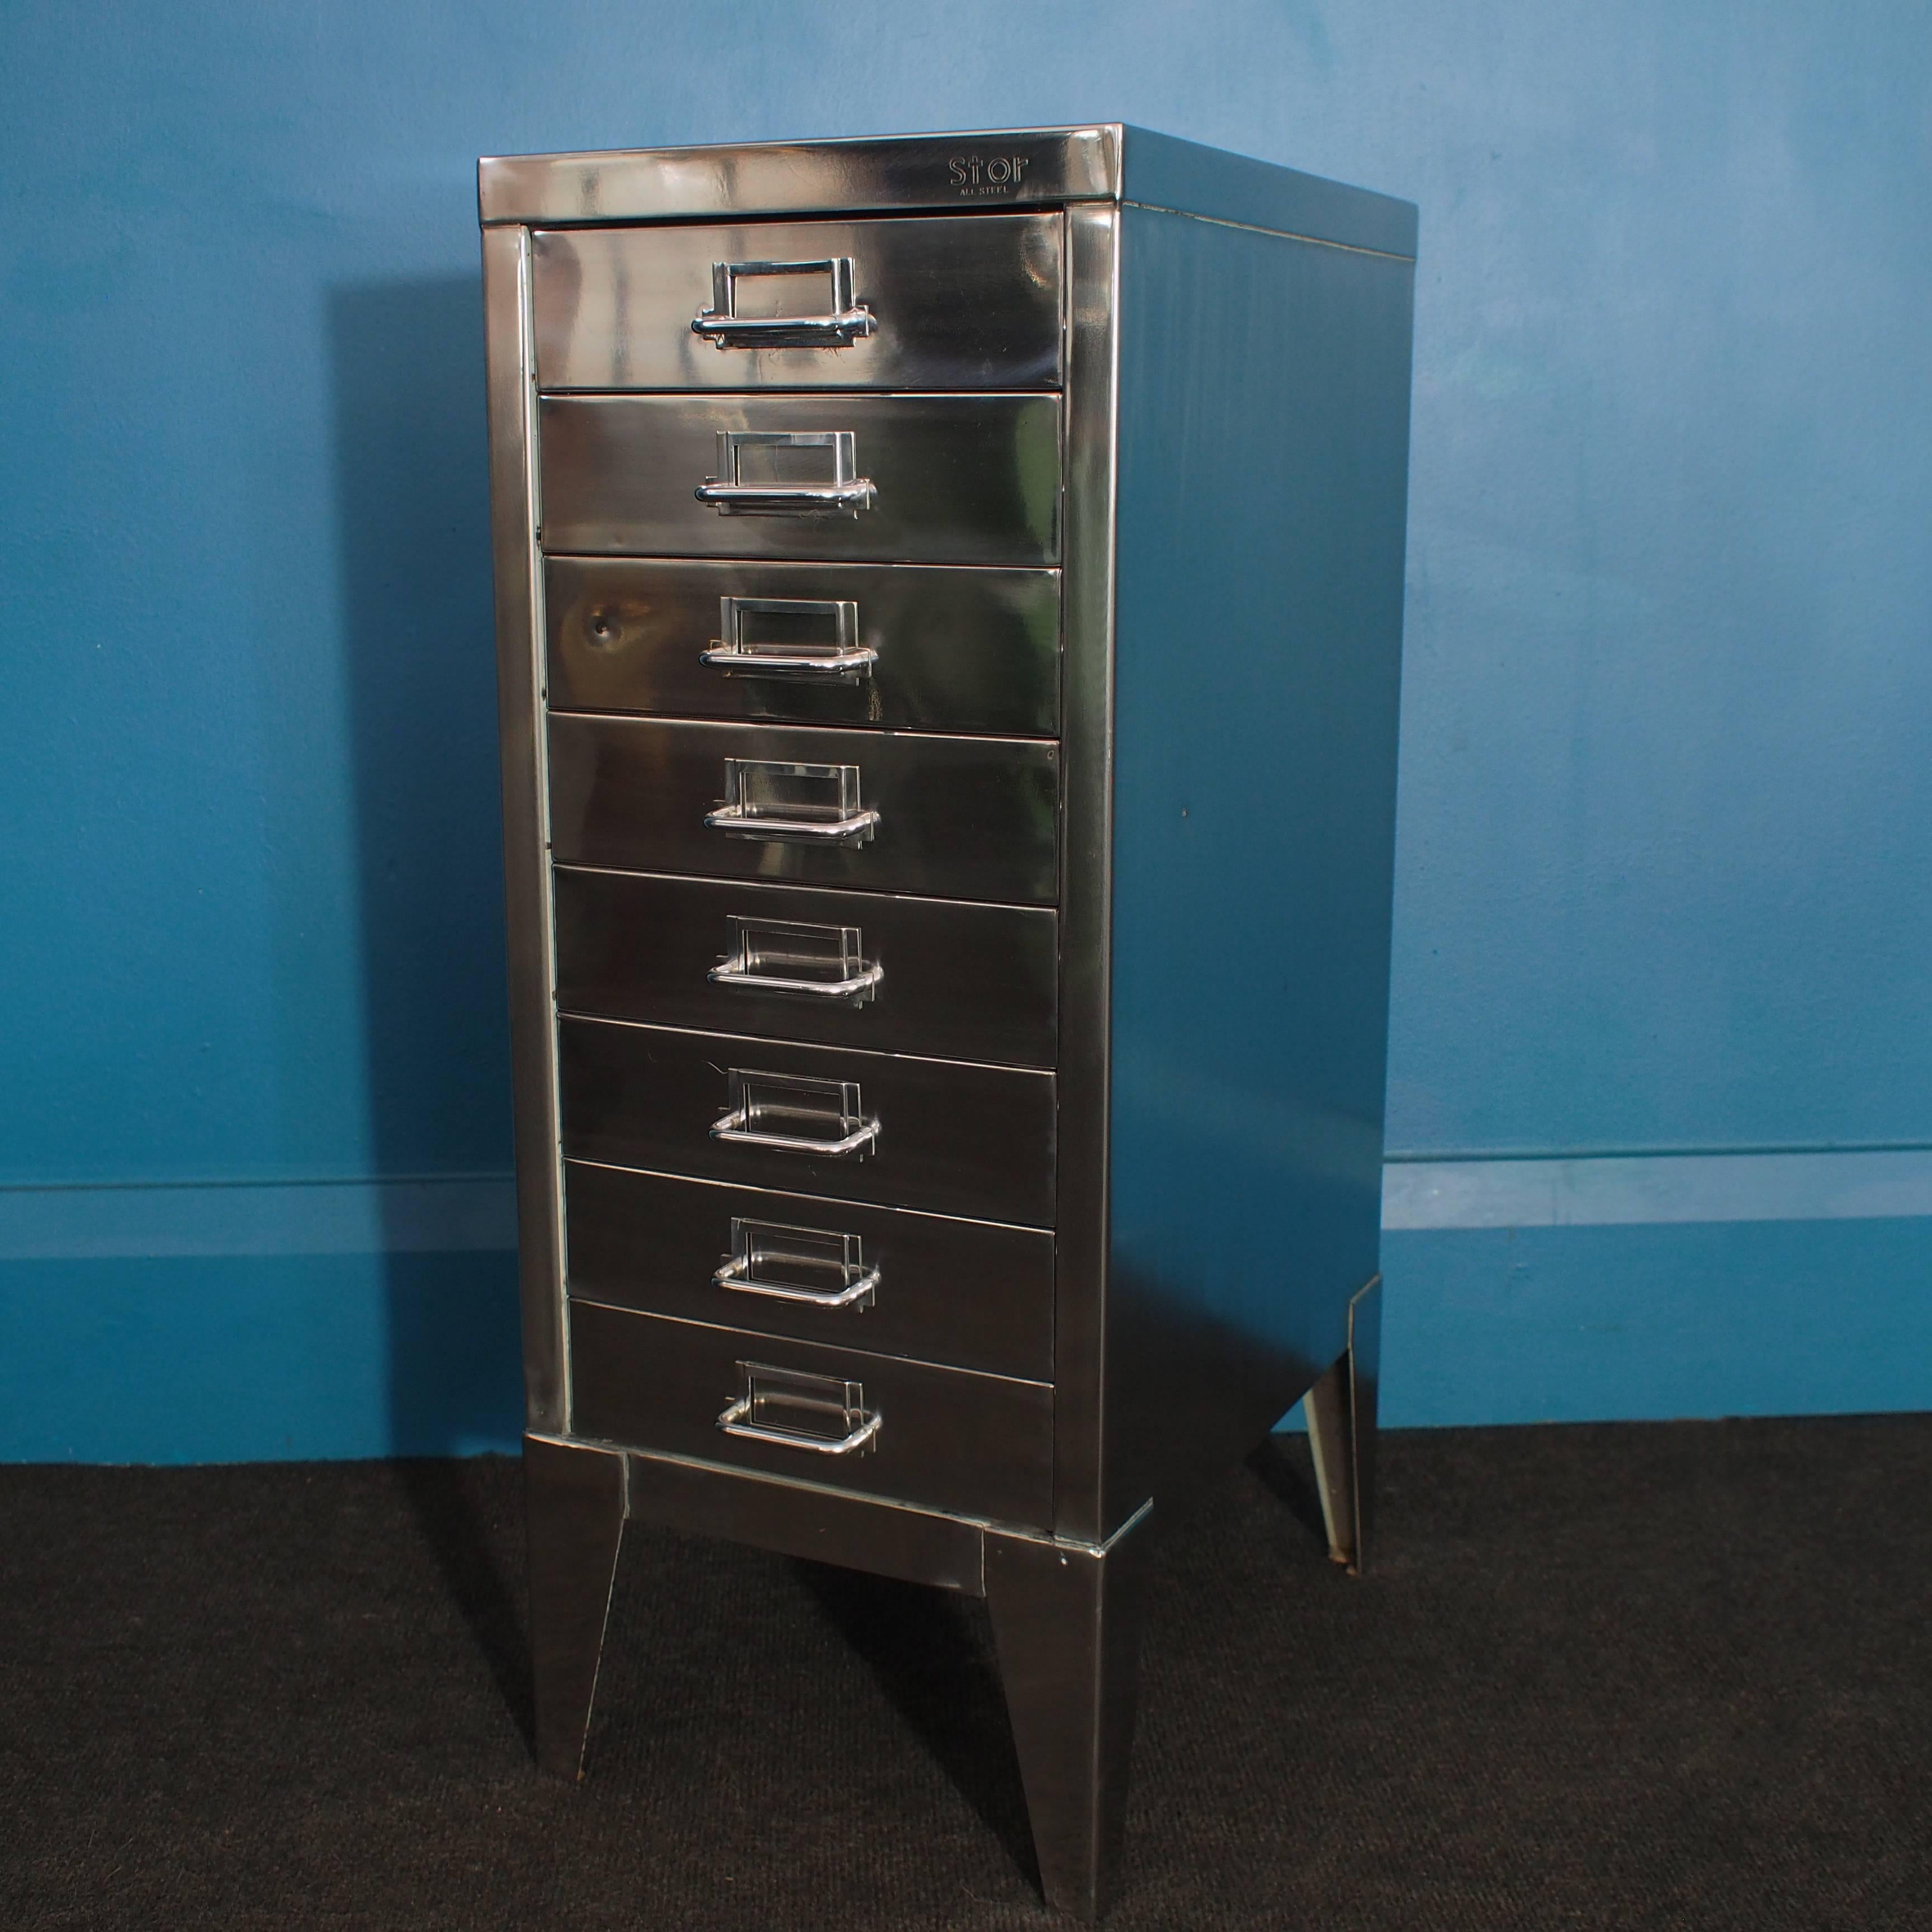 Industrial Polished Steel Filing Cabinet with Tapered Legs by Stor, circa 1950s 3